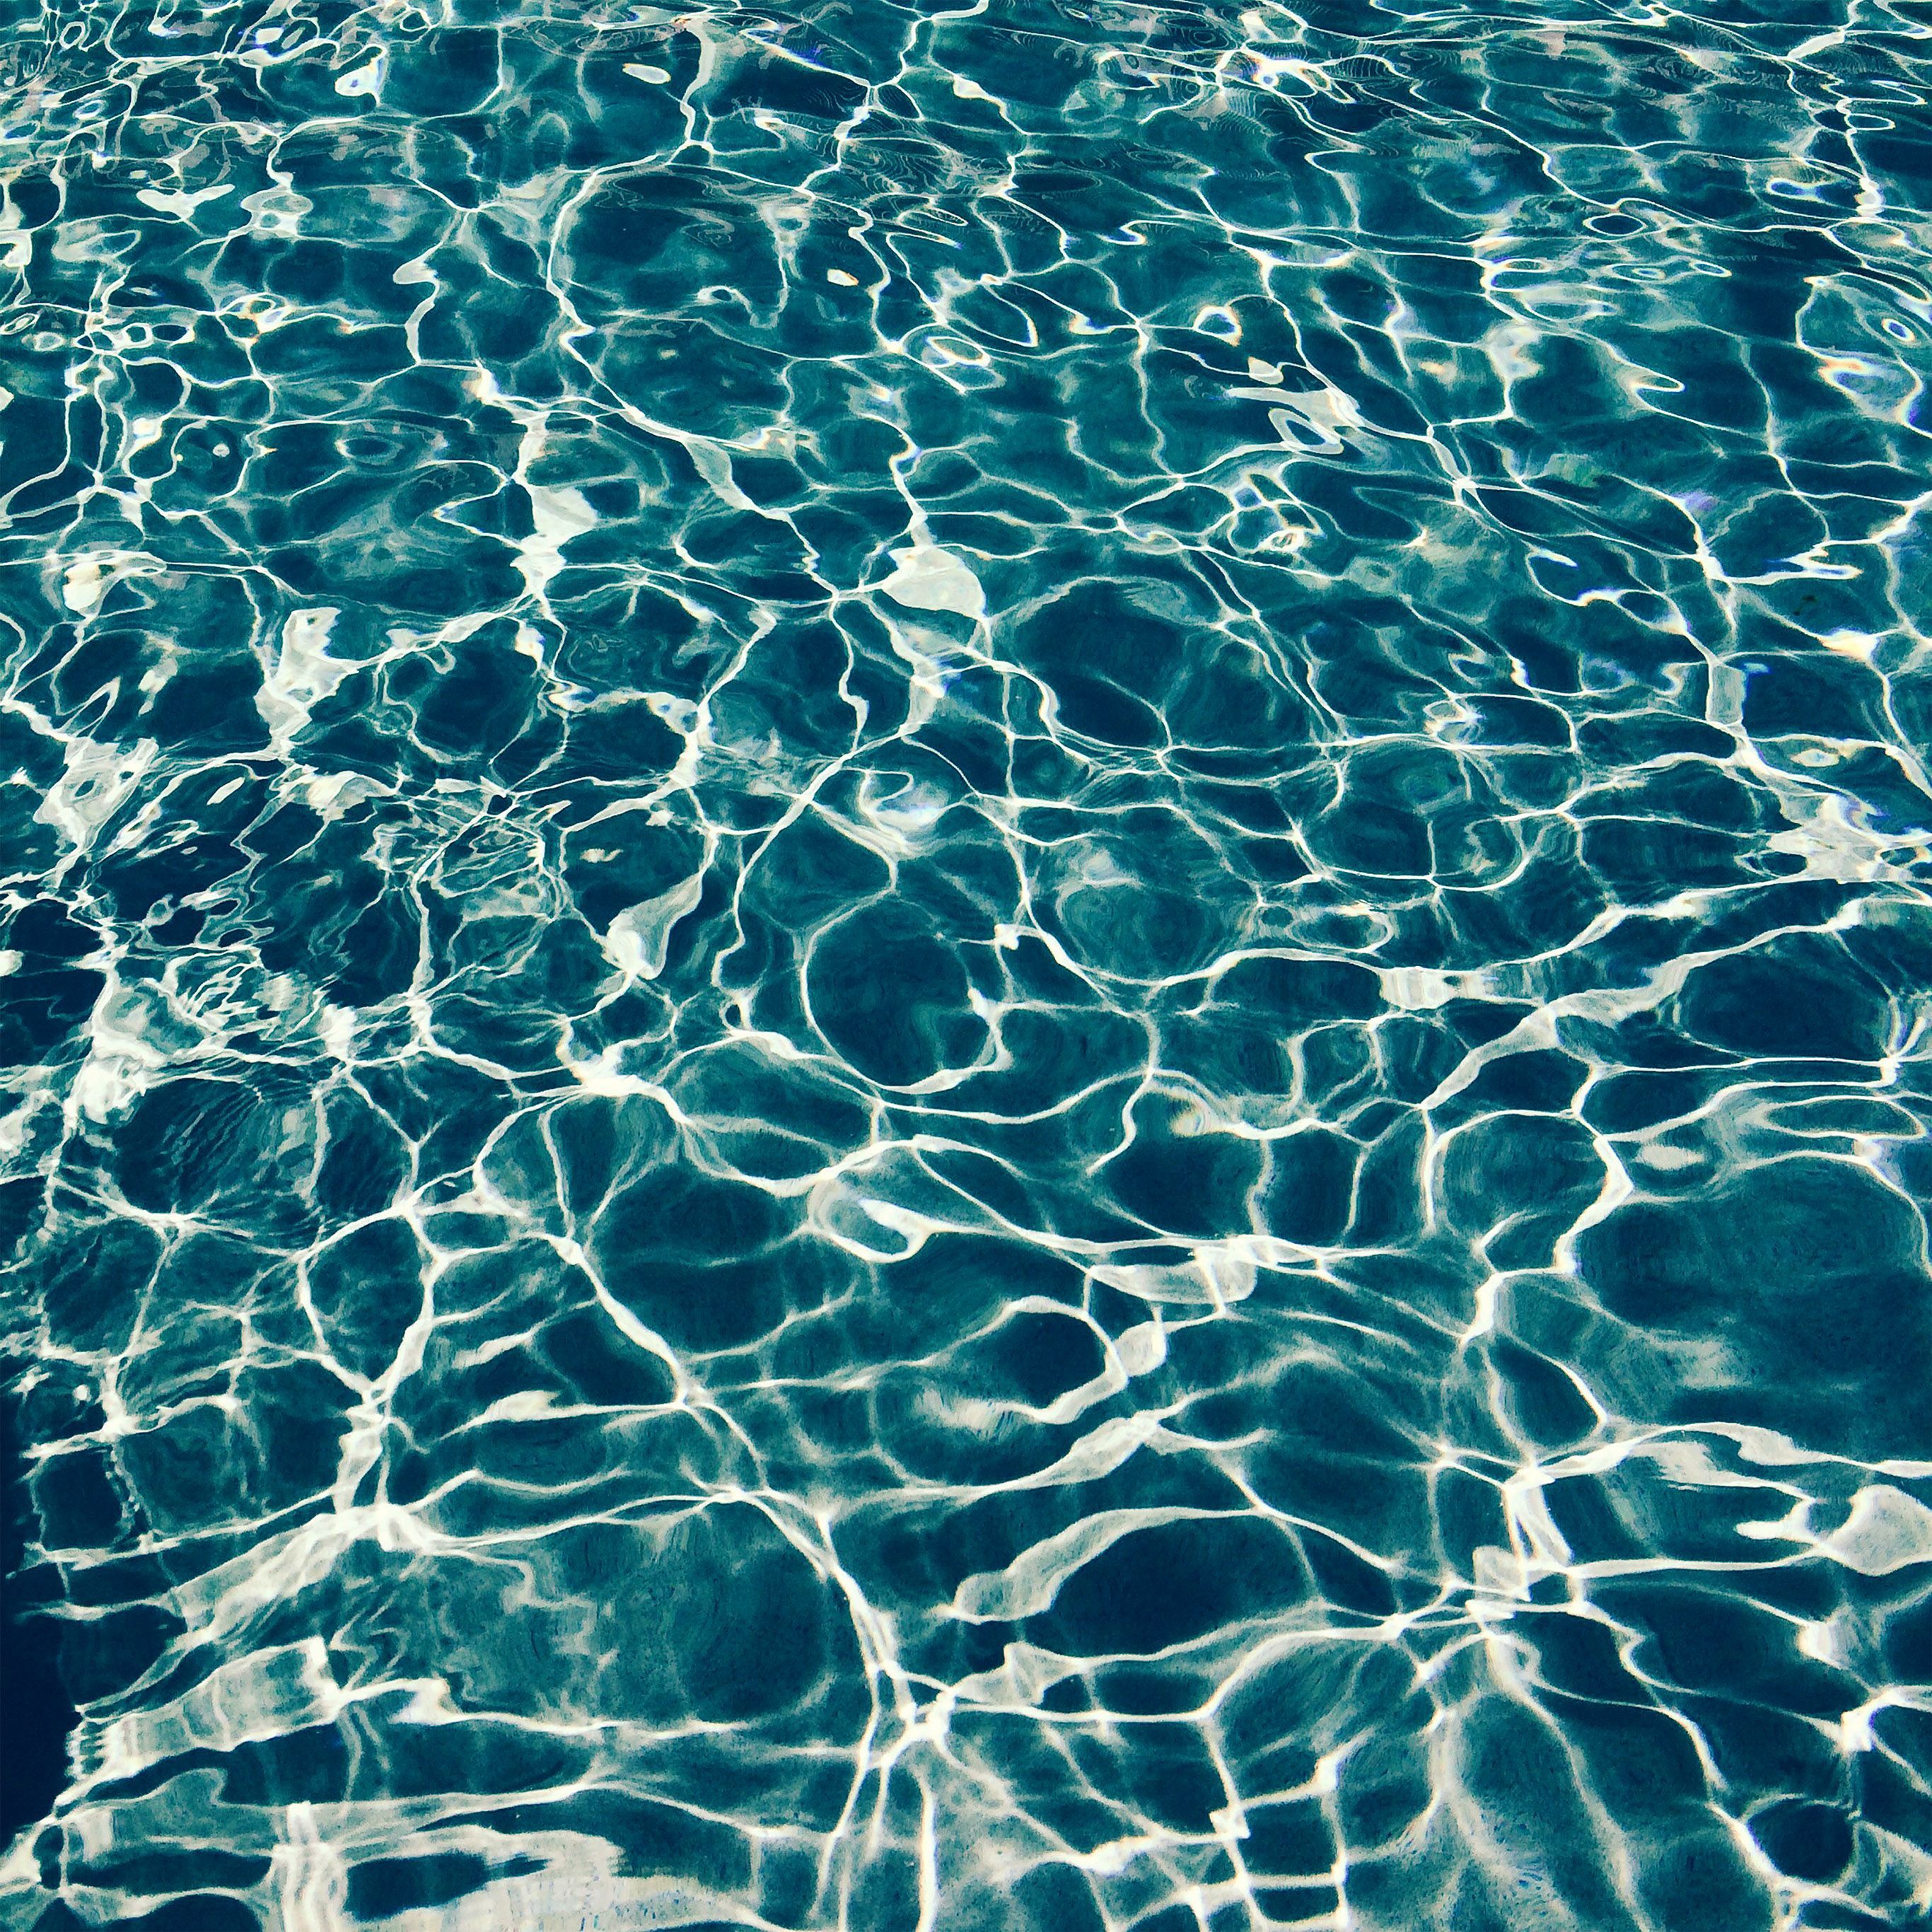 The water in a pool is very clear - Swimming pool, water, aqua